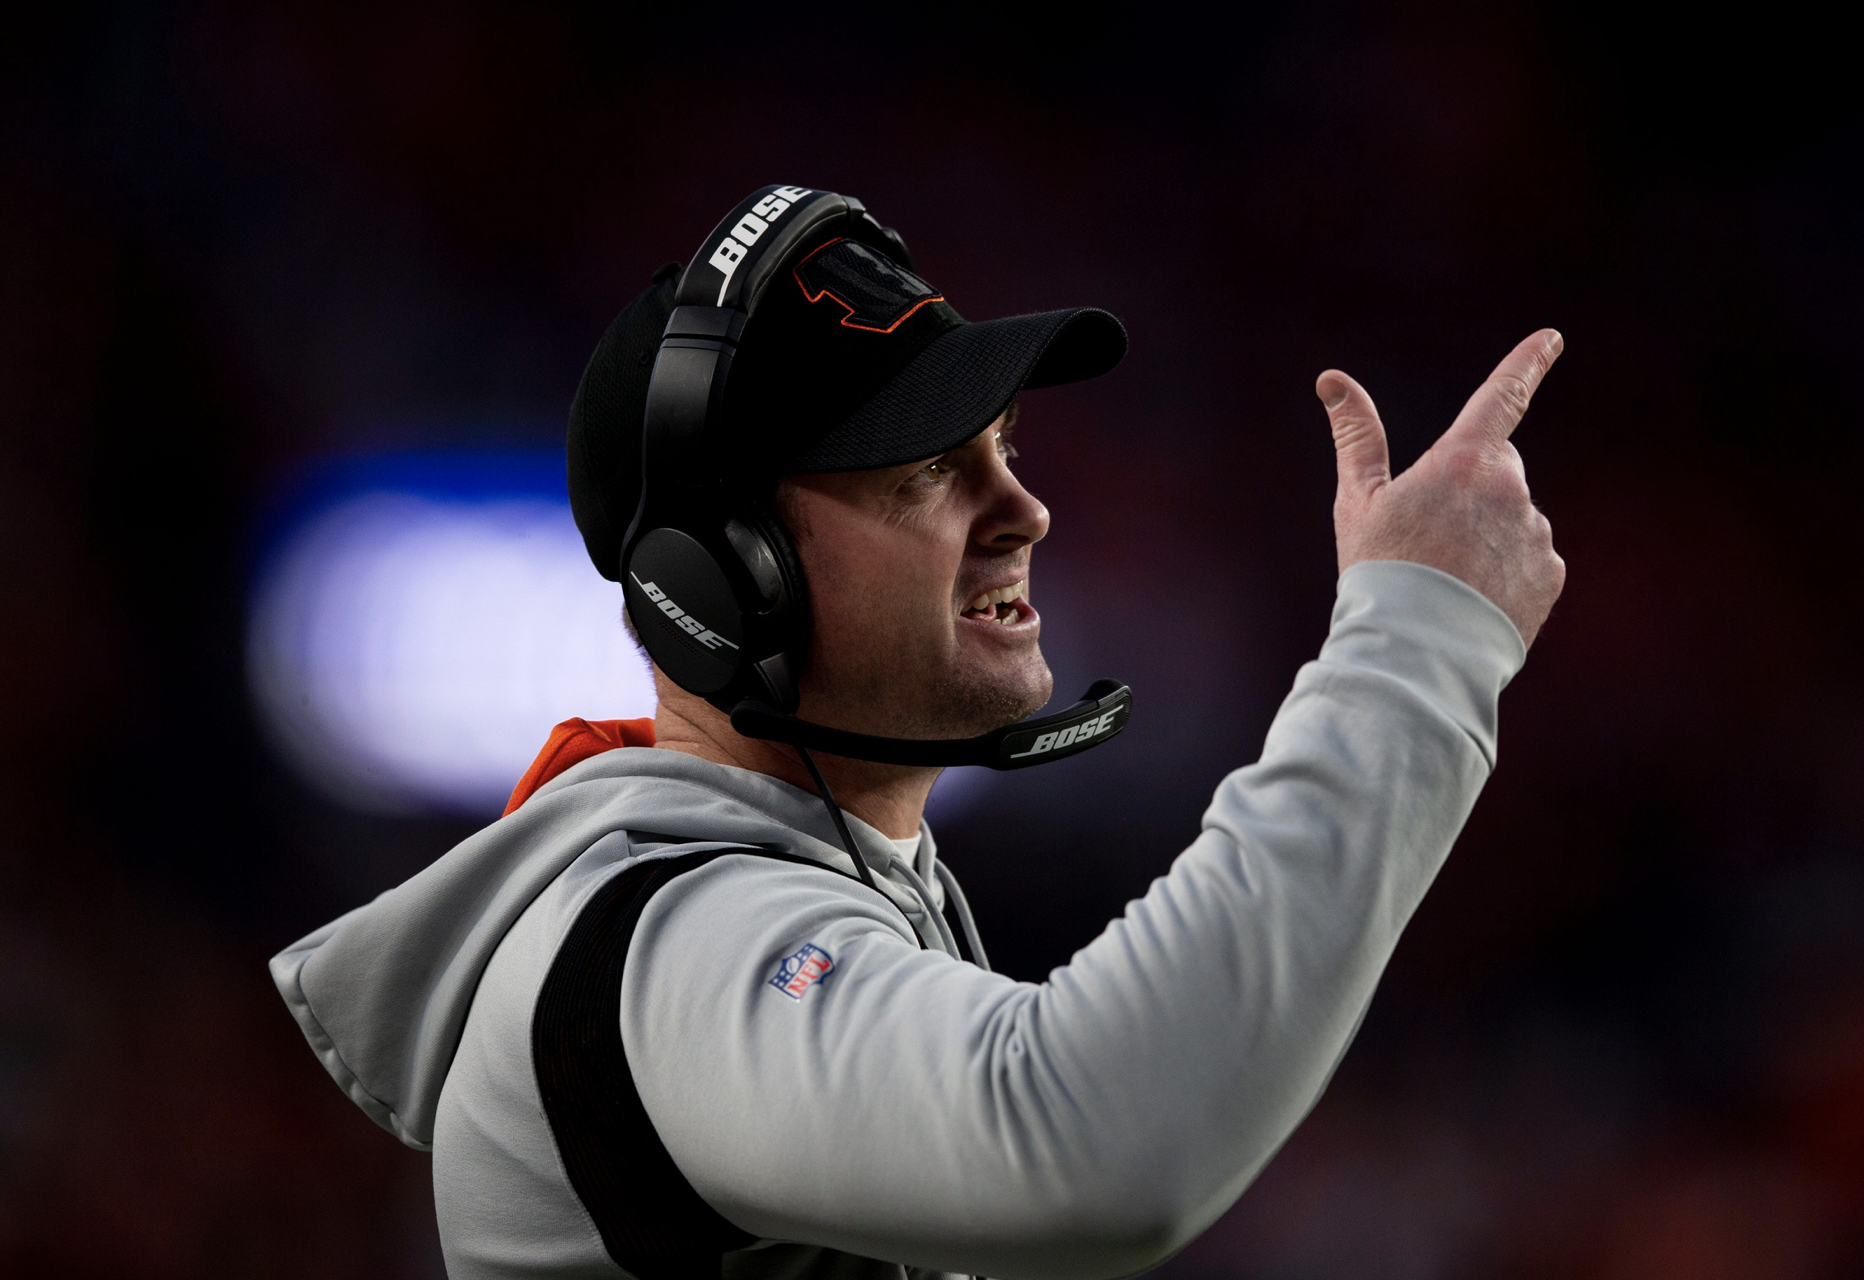 CULTURE CREATOR: In Leading Bengals to AFC North Title, Zac Taylor Should  Be NFL Coach of the Year - CLNS Media